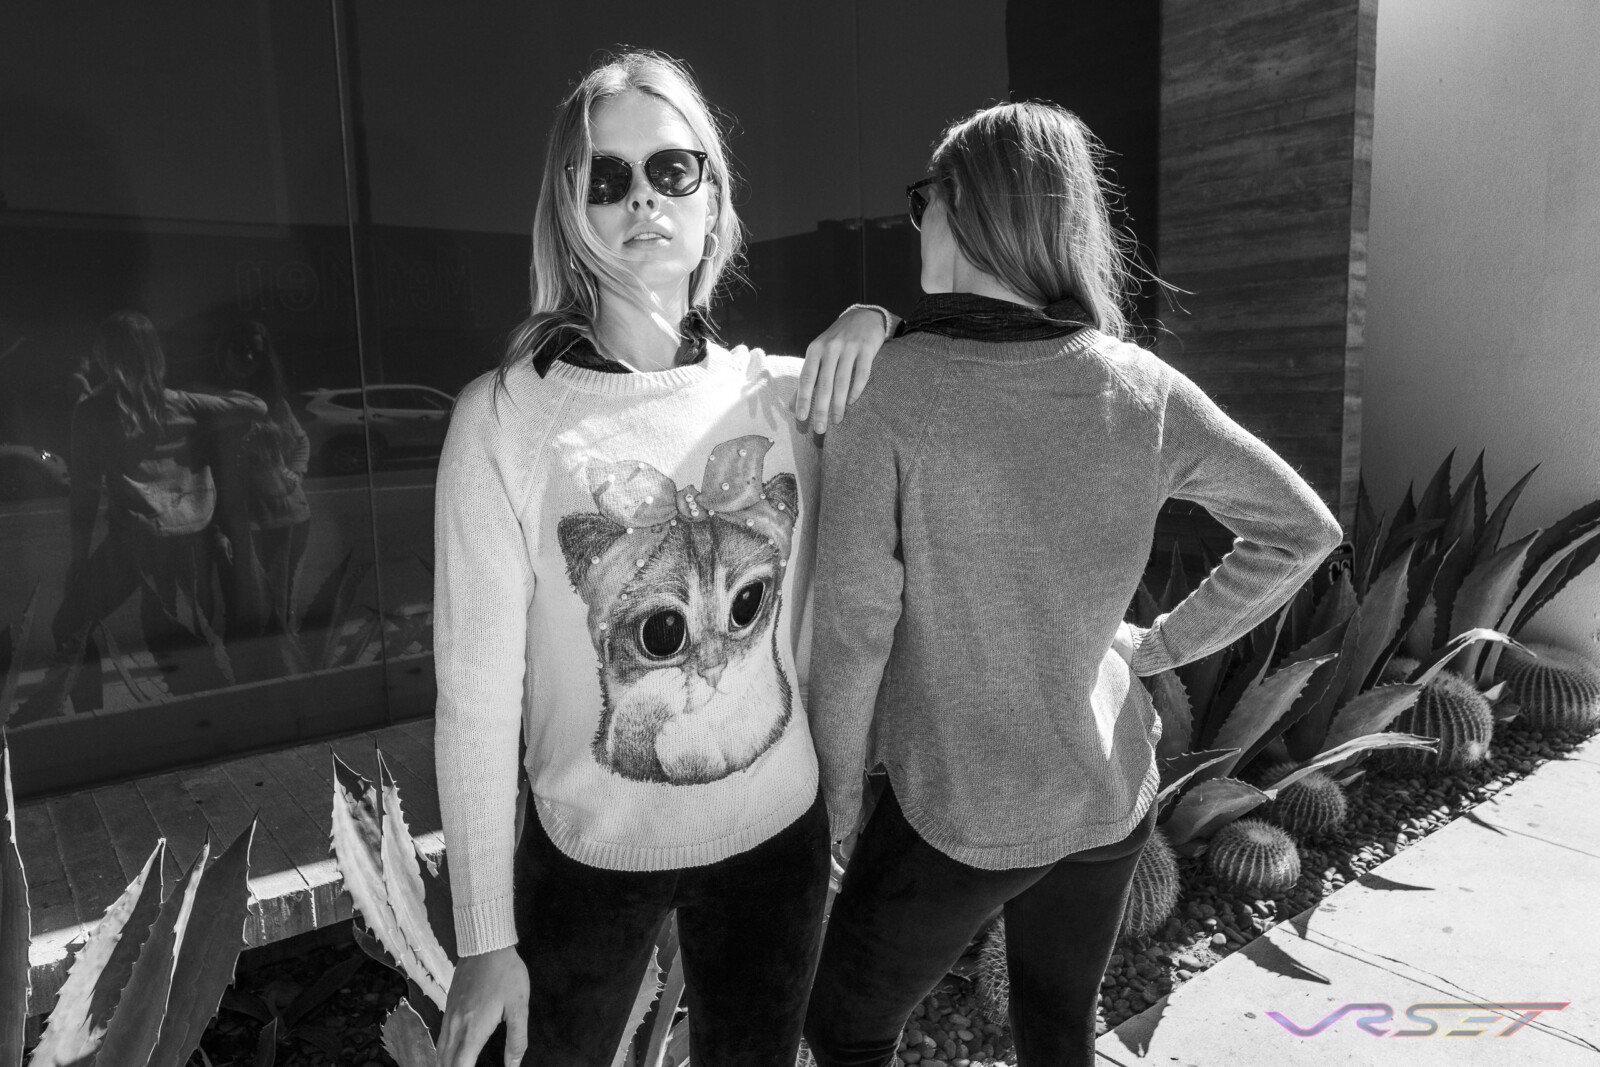 Lookbook Cat Print Knitted Sweater Two Female Models Black And White Top Fashion Photographer Los Angeles Orange County Video Production David Victory